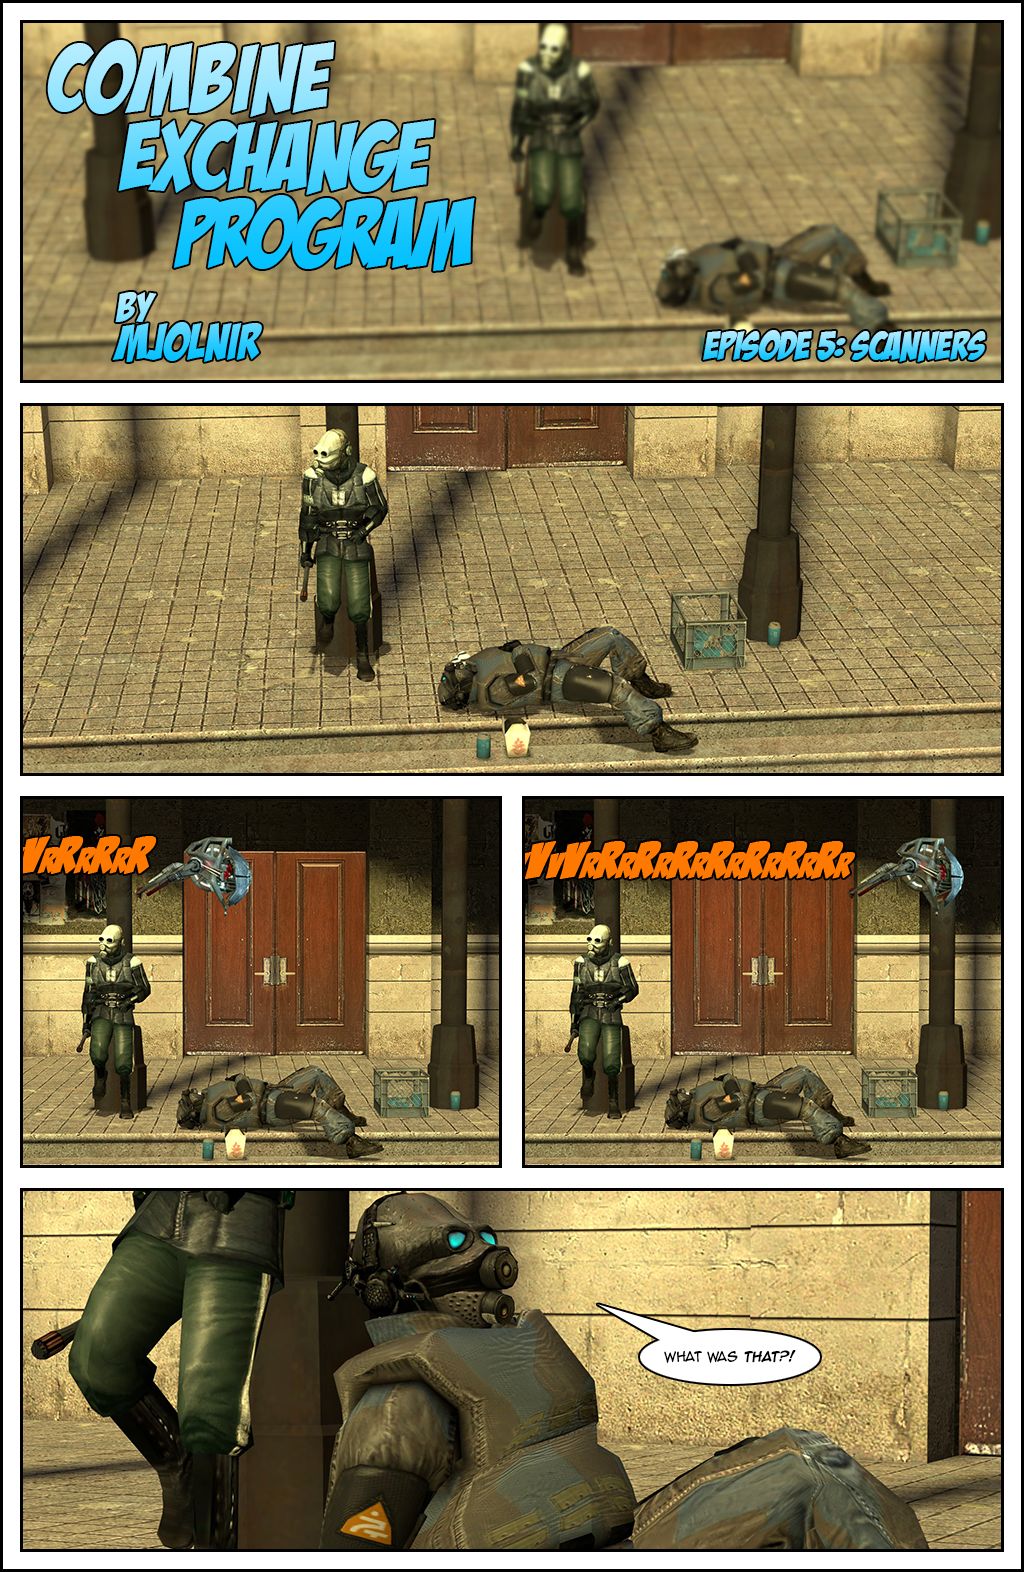 The metro cop and the Combine soldier are hanging out near the steps of the City 17 train station plaza. The cop is leaning next to a pillar while the Combine soldier is lying on the ground looking bored. A Combine scanner then flies past them, prompting the soldier to suddenly jump up and ask what that was.